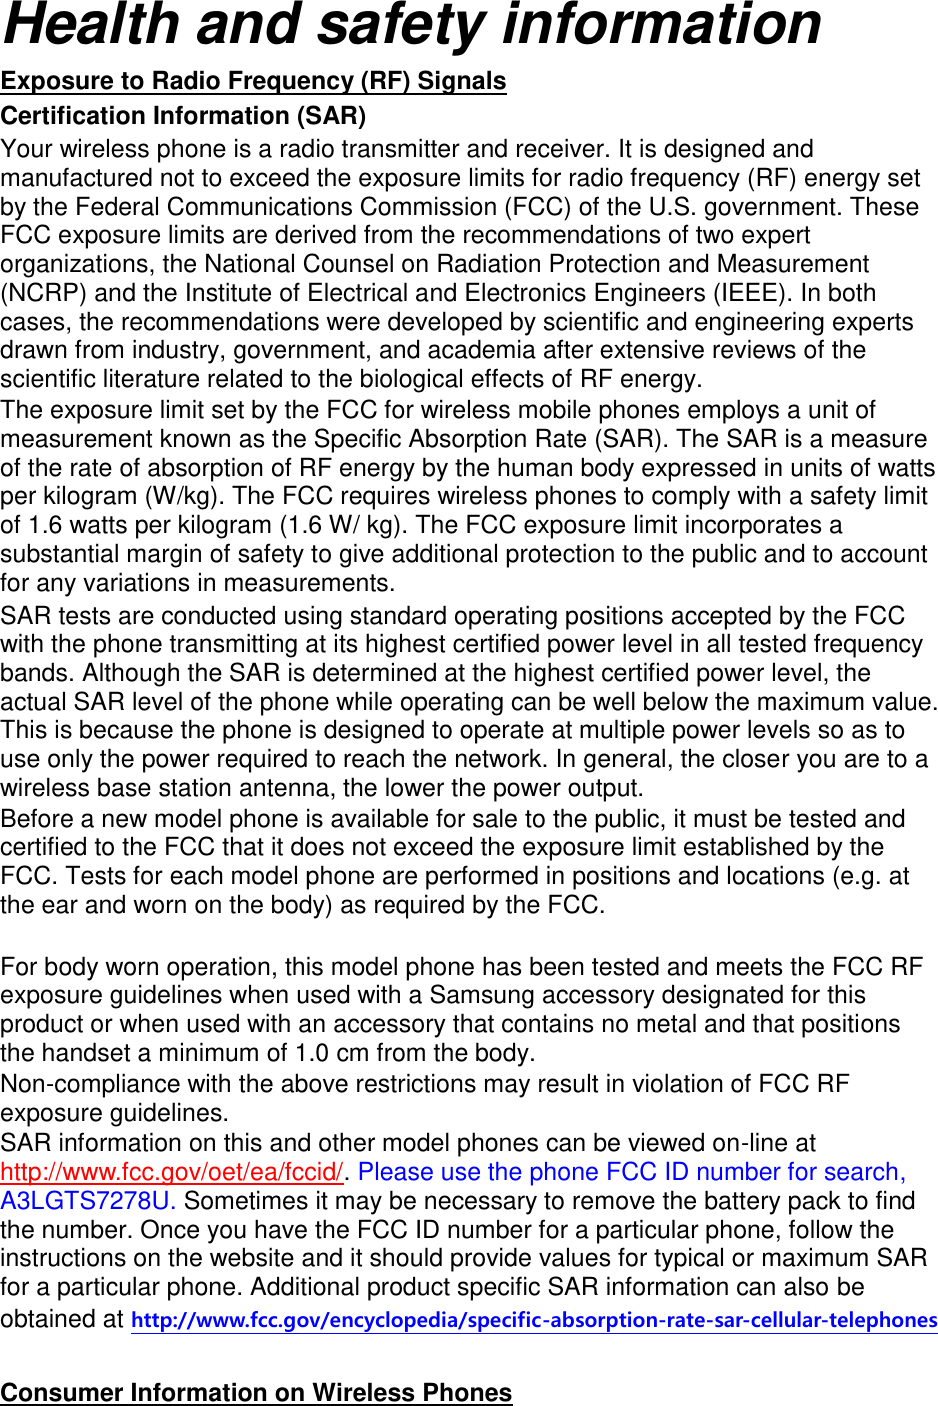 Health and safety information Exposure to Radio Frequency (RF) Signals Certification Information (SAR) Your wireless phone is a radio transmitter and receiver. It is designed and manufactured not to exceed the exposure limits for radio frequency (RF) energy set by the Federal Communications Commission (FCC) of the U.S. government. These FCC exposure limits are derived from the recommendations of two expert organizations, the National Counsel on Radiation Protection and Measurement (NCRP) and the Institute of Electrical and Electronics Engineers (IEEE). In both cases, the recommendations were developed by scientific and engineering experts drawn from industry, government, and academia after extensive reviews of the scientific literature related to the biological effects of RF energy. The exposure limit set by the FCC for wireless mobile phones employs a unit of measurement known as the Specific Absorption Rate (SAR). The SAR is a measure of the rate of absorption of RF energy by the human body expressed in units of watts per kilogram (W/kg). The FCC requires wireless phones to comply with a safety limit of 1.6 watts per kilogram (1.6 W/ kg). The FCC exposure limit incorporates a substantial margin of safety to give additional protection to the public and to account for any variations in measurements. SAR tests are conducted using standard operating positions accepted by the FCC with the phone transmitting at its highest certified power level in all tested frequency bands. Although the SAR is determined at the highest certified power level, the actual SAR level of the phone while operating can be well below the maximum value. This is because the phone is designed to operate at multiple power levels so as to use only the power required to reach the network. In general, the closer you are to a wireless base station antenna, the lower the power output. Before a new model phone is available for sale to the public, it must be tested and certified to the FCC that it does not exceed the exposure limit established by the FCC. Tests for each model phone are performed in positions and locations (e.g. at the ear and worn on the body) as required by the FCC.      For body worn operation, this model phone has been tested and meets the FCC RF exposure guidelines when used with a Samsung accessory designated for this product or when used with an accessory that contains no metal and that positions the handset a minimum of 1.0 cm from the body.   Non-compliance with the above restrictions may result in violation of FCC RF exposure guidelines. SAR information on this and other model phones can be viewed on-line at http://www.fcc.gov/oet/ea/fccid/. Please use the phone FCC ID number for search, A3LGTS7278U. Sometimes it may be necessary to remove the battery pack to find the number. Once you have the FCC ID number for a particular phone, follow the instructions on the website and it should provide values for typical or maximum SAR for a particular phone. Additional product specific SAR information can also be obtained at http://www.fcc.gov/encyclopedia/specific-absorption-rate-sar-cellular-telephones  Consumer Information on Wireless Phones 